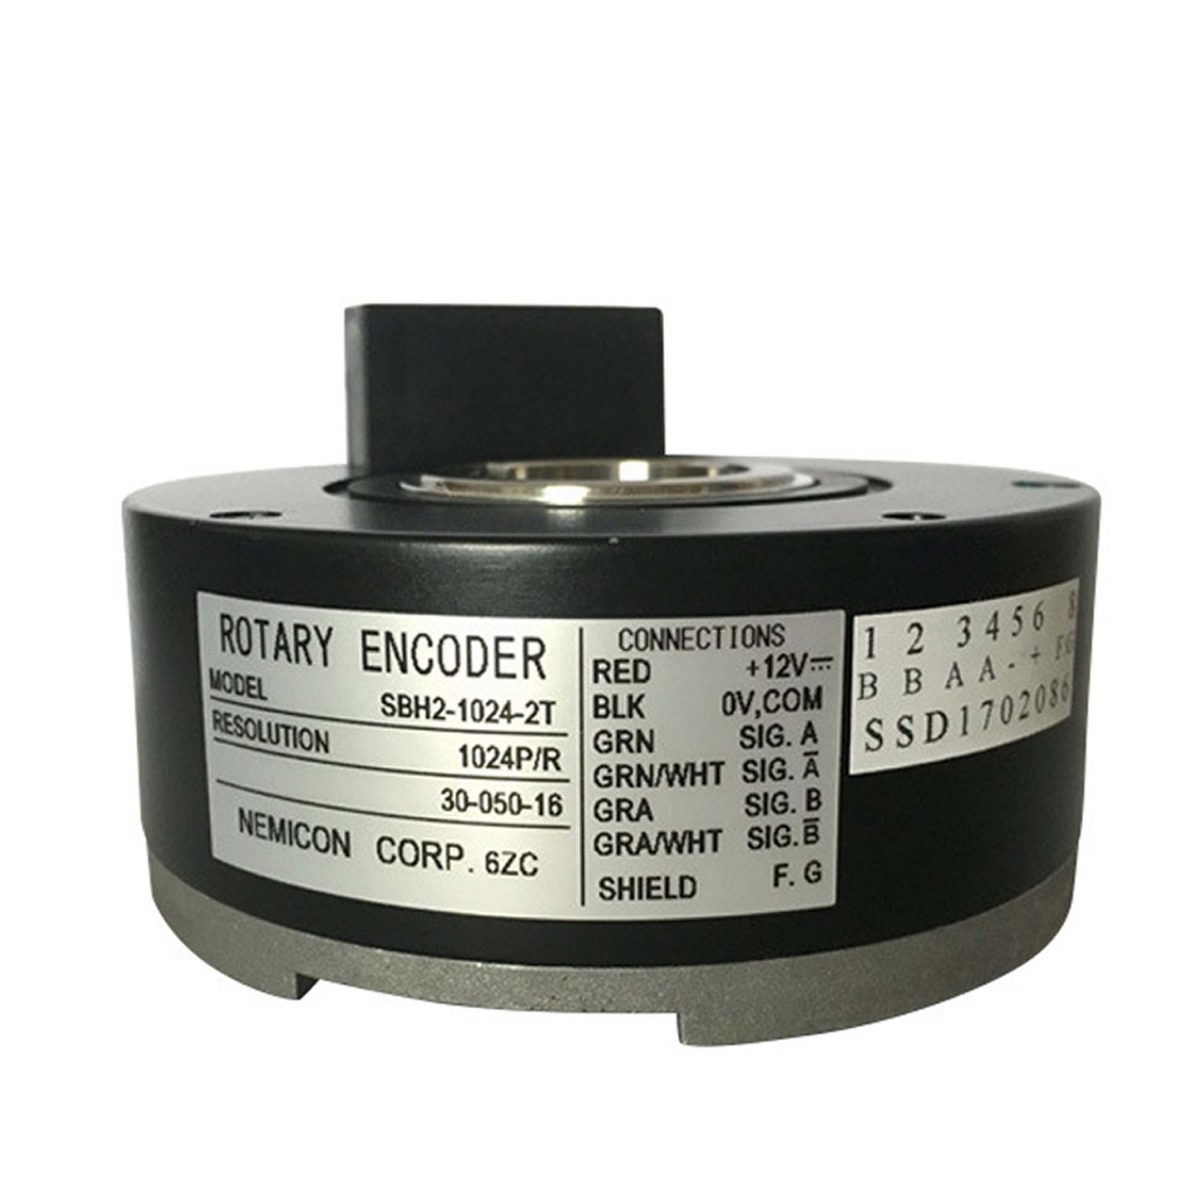 SBH-1024-2T Nemicon Elevator Rotary Encoder For Motor With Cable 12 V , 1024 P-R